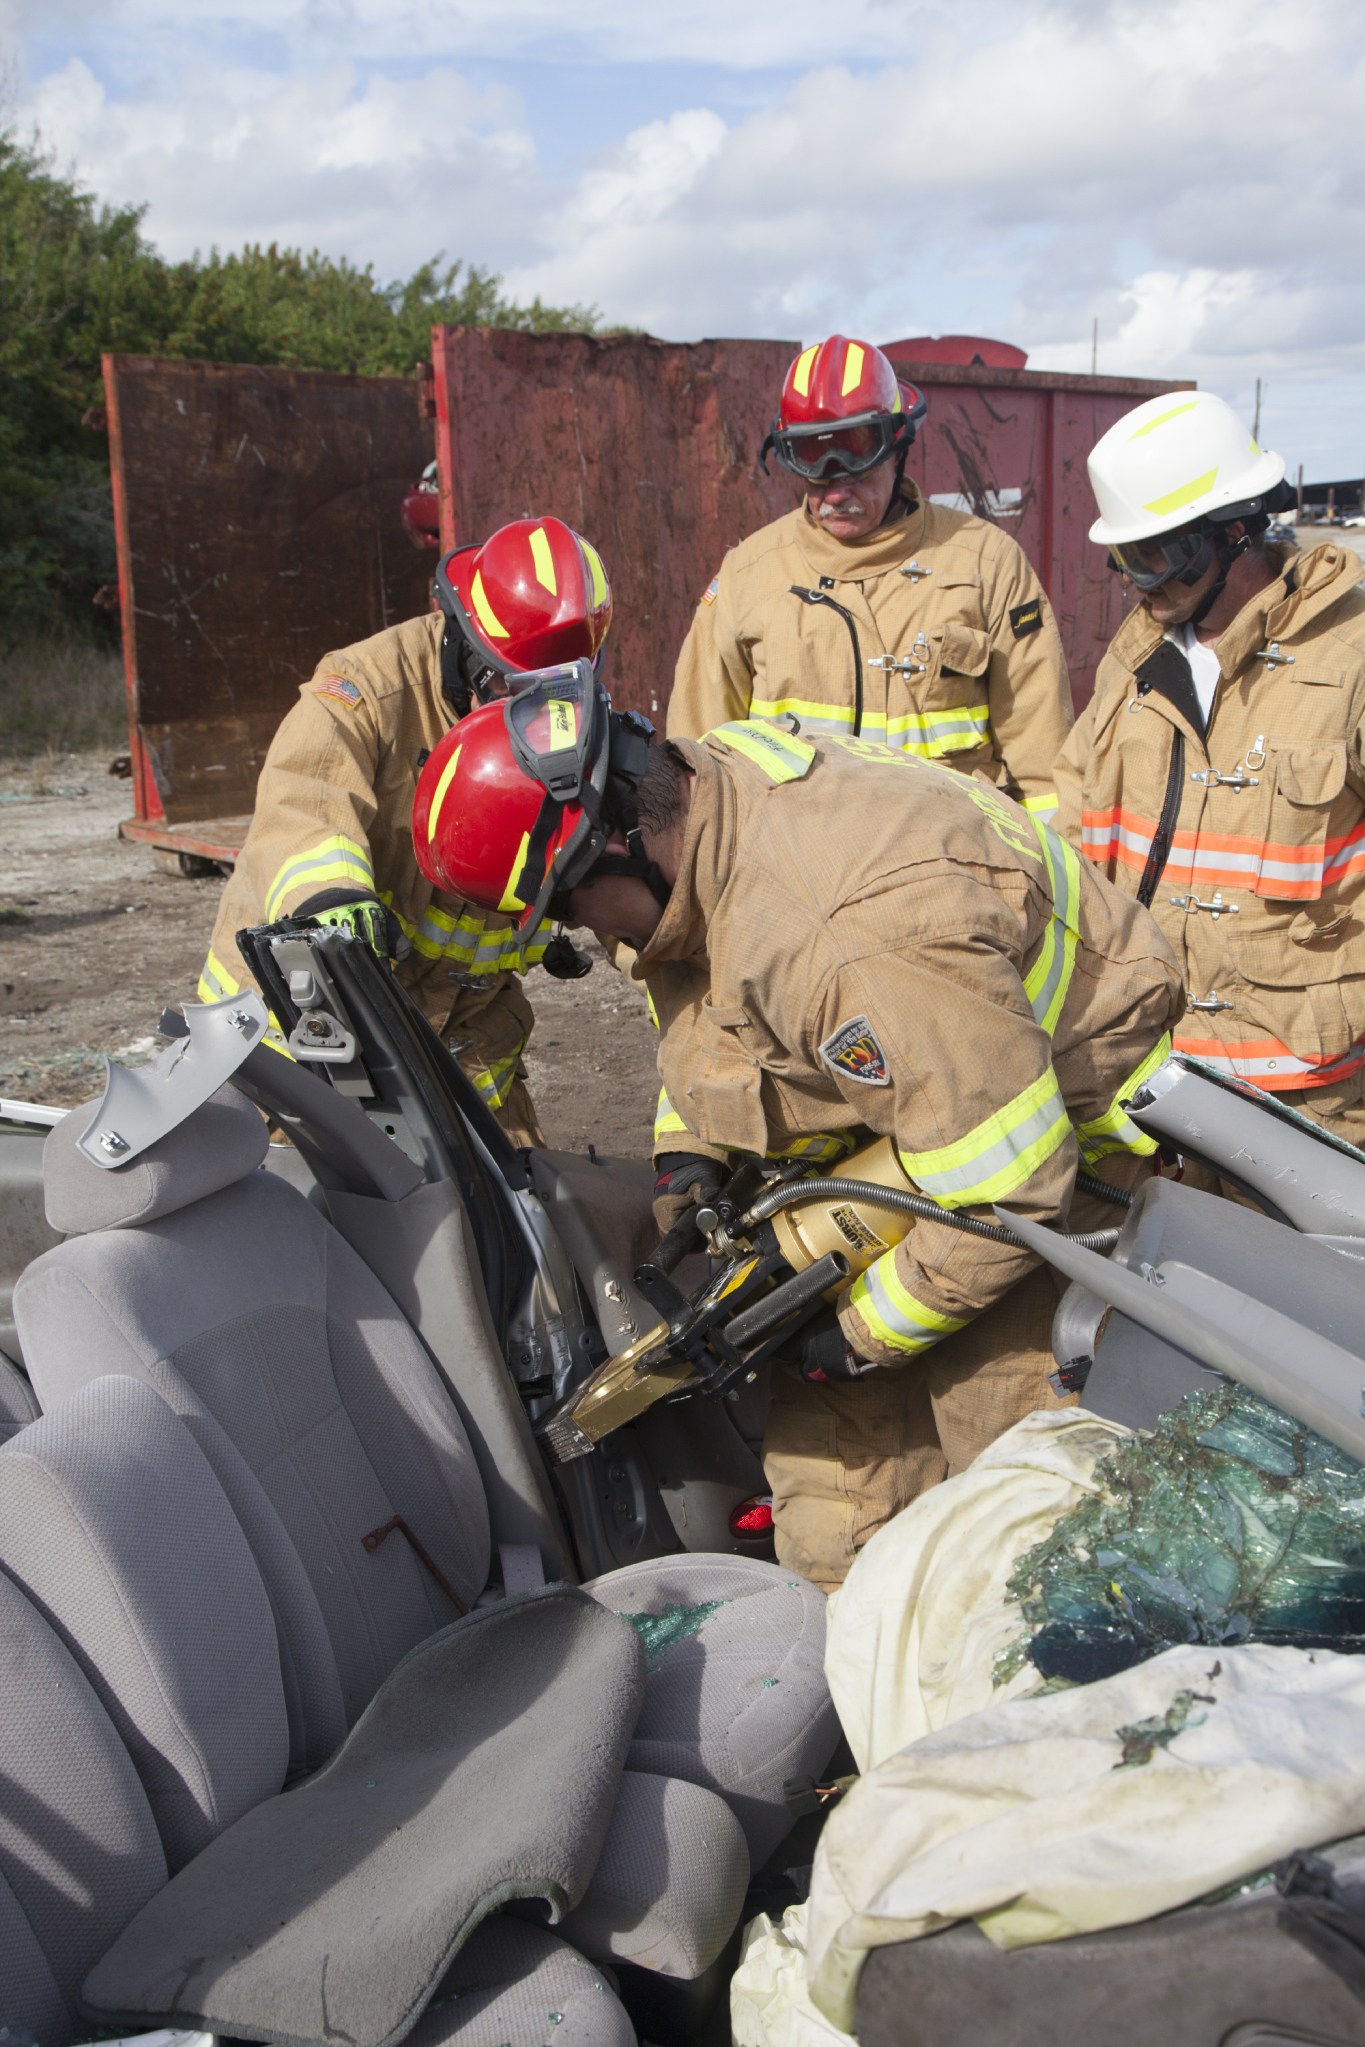 Special Rescue Operations firefighters with NASA Fire Rescue Services in the Protective Services Office at NASA's Kennedy Space Center in Florida practice vehicle extrication training at an auto salvage yard near the center. A firefighter uses the Jaws of Life to finish removing the door from the vehicle and simulate the rescue of a trapped and injured person.